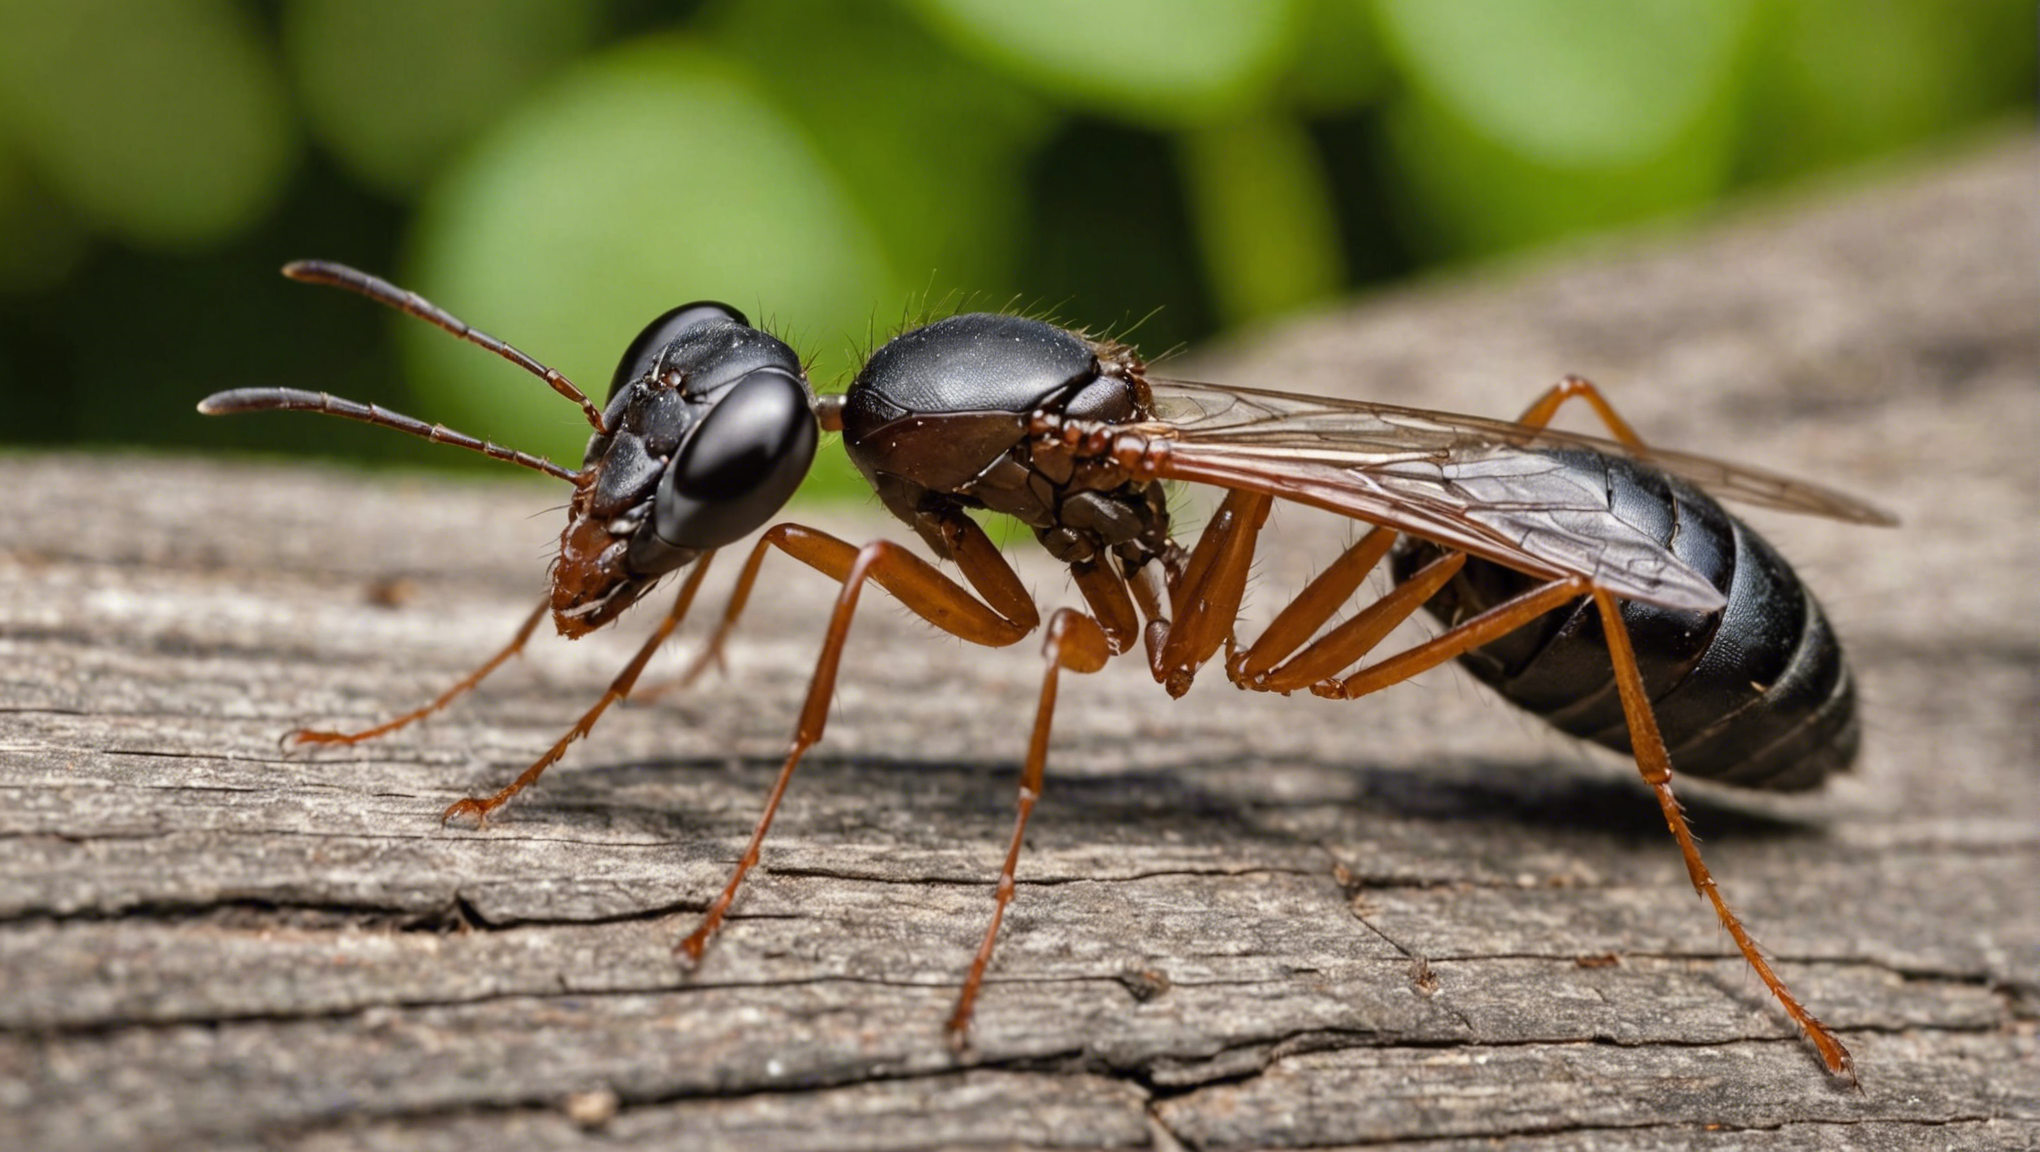 learn effective strategies to keep ants, mosquitoes, and flies at bay this summer. say goodbye to pesky summer pests with our expert tips!